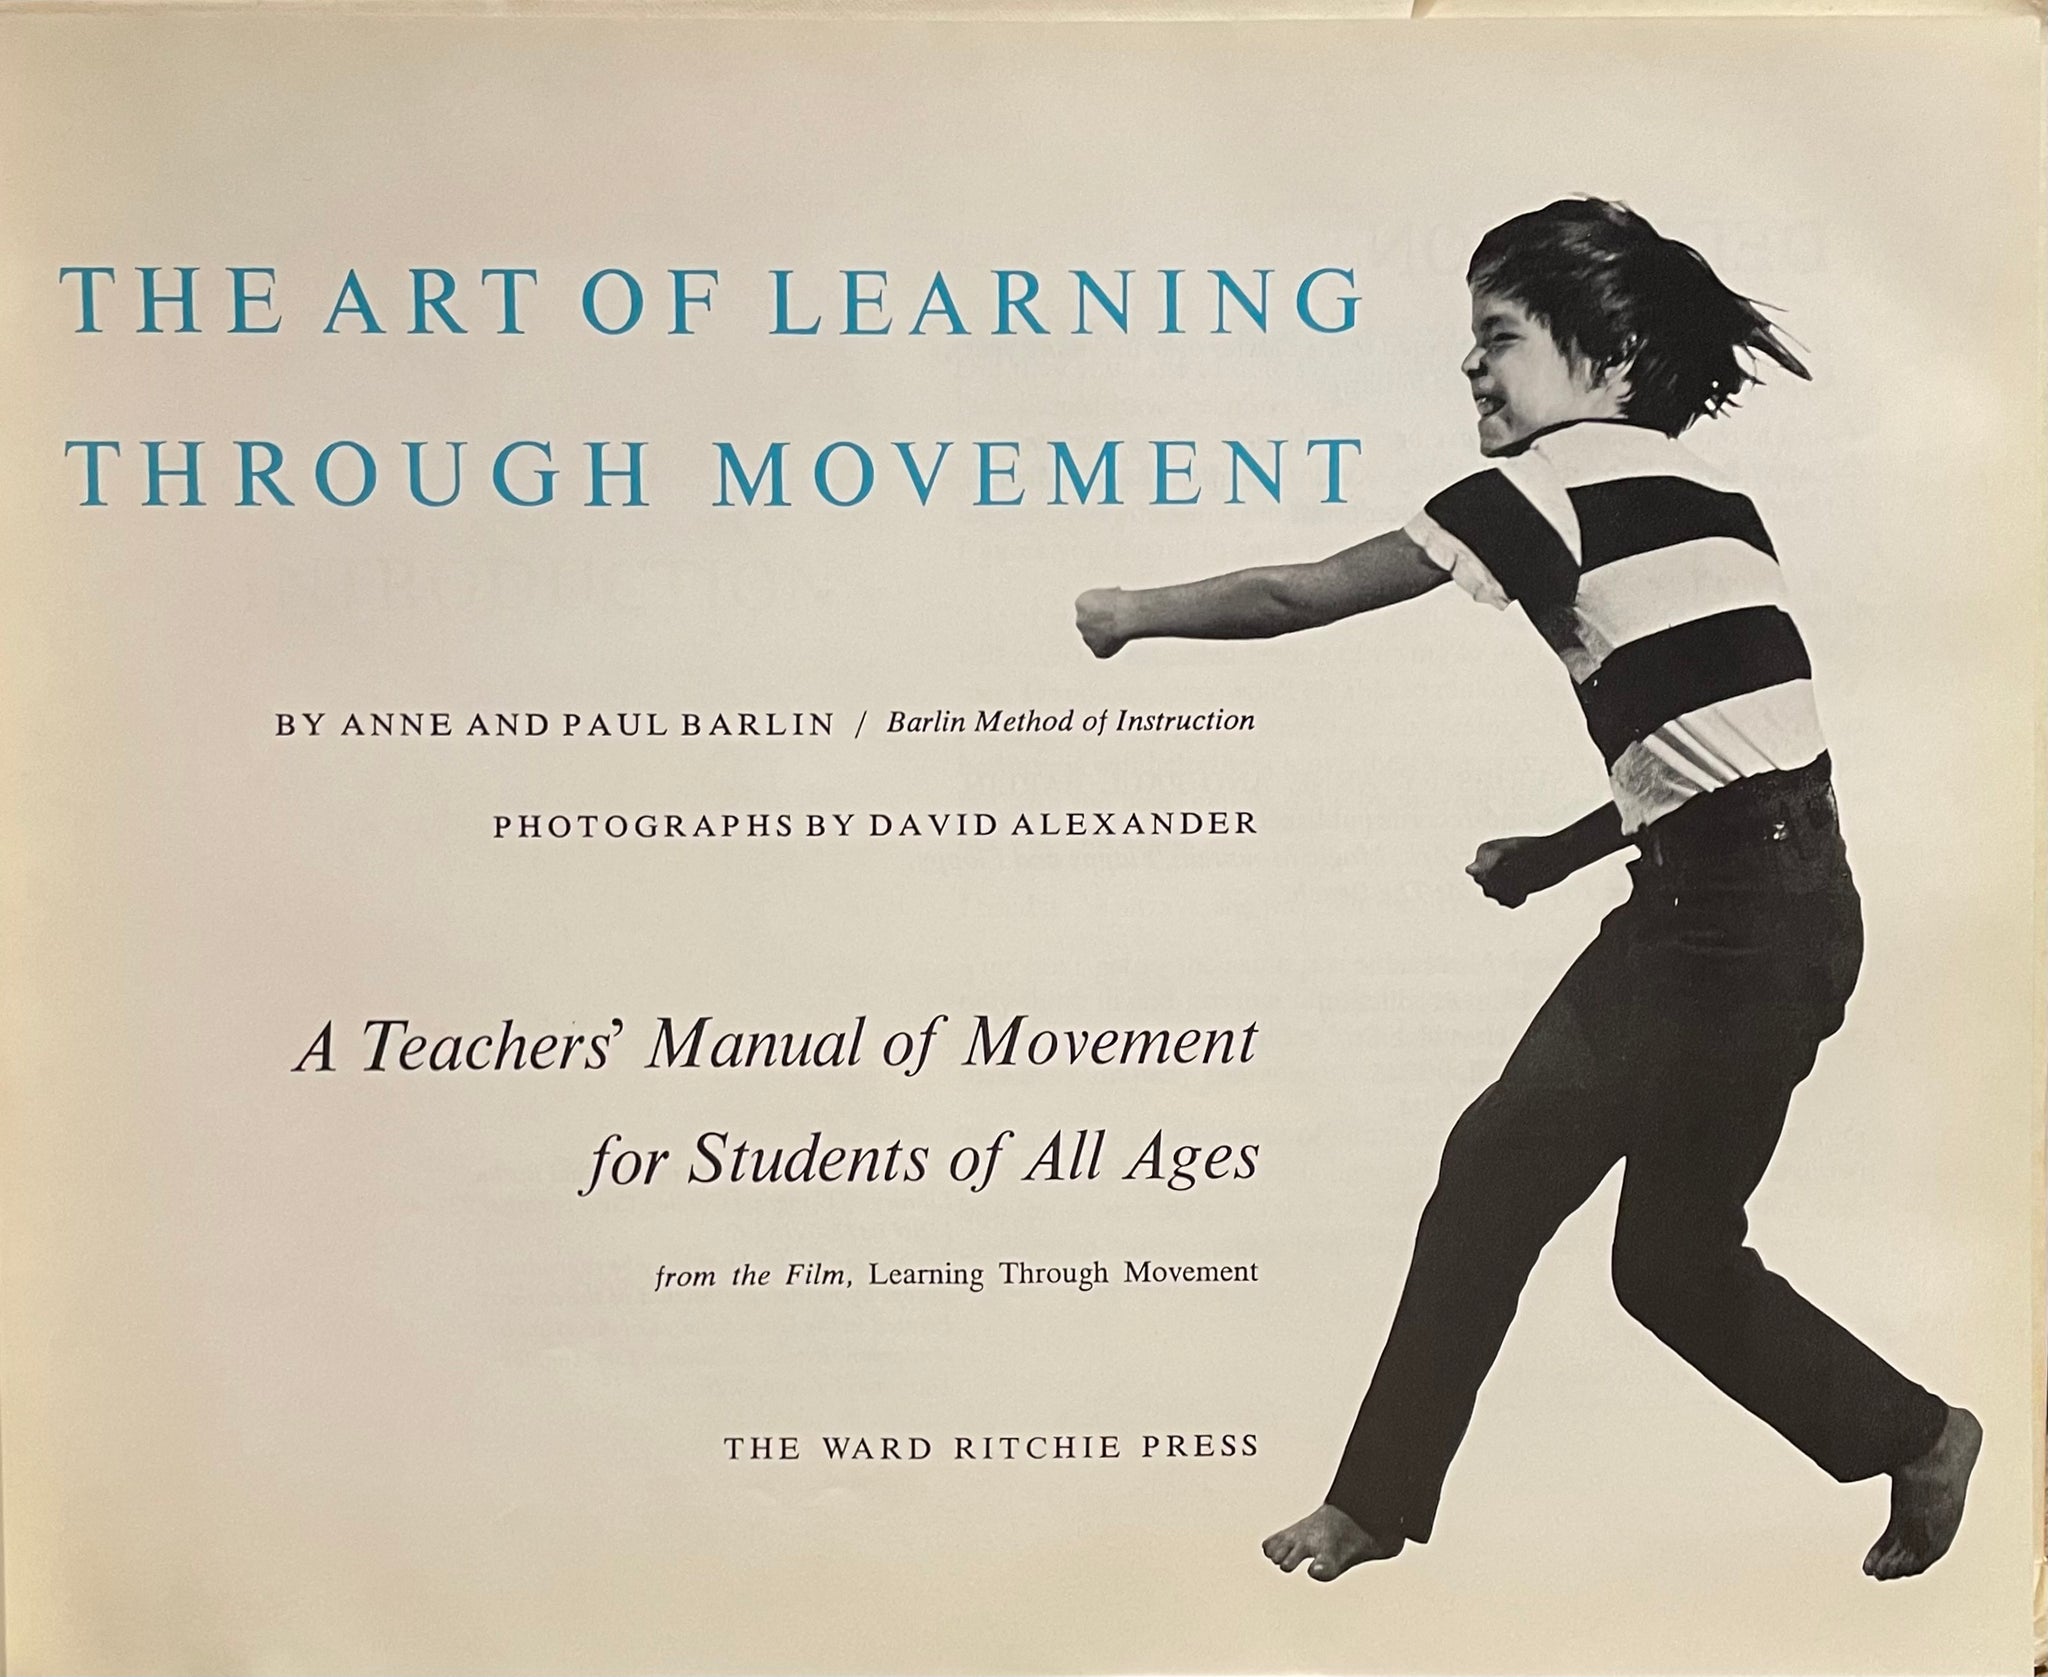 The Art of Learning Through Movement - Anne and Paul Barlin